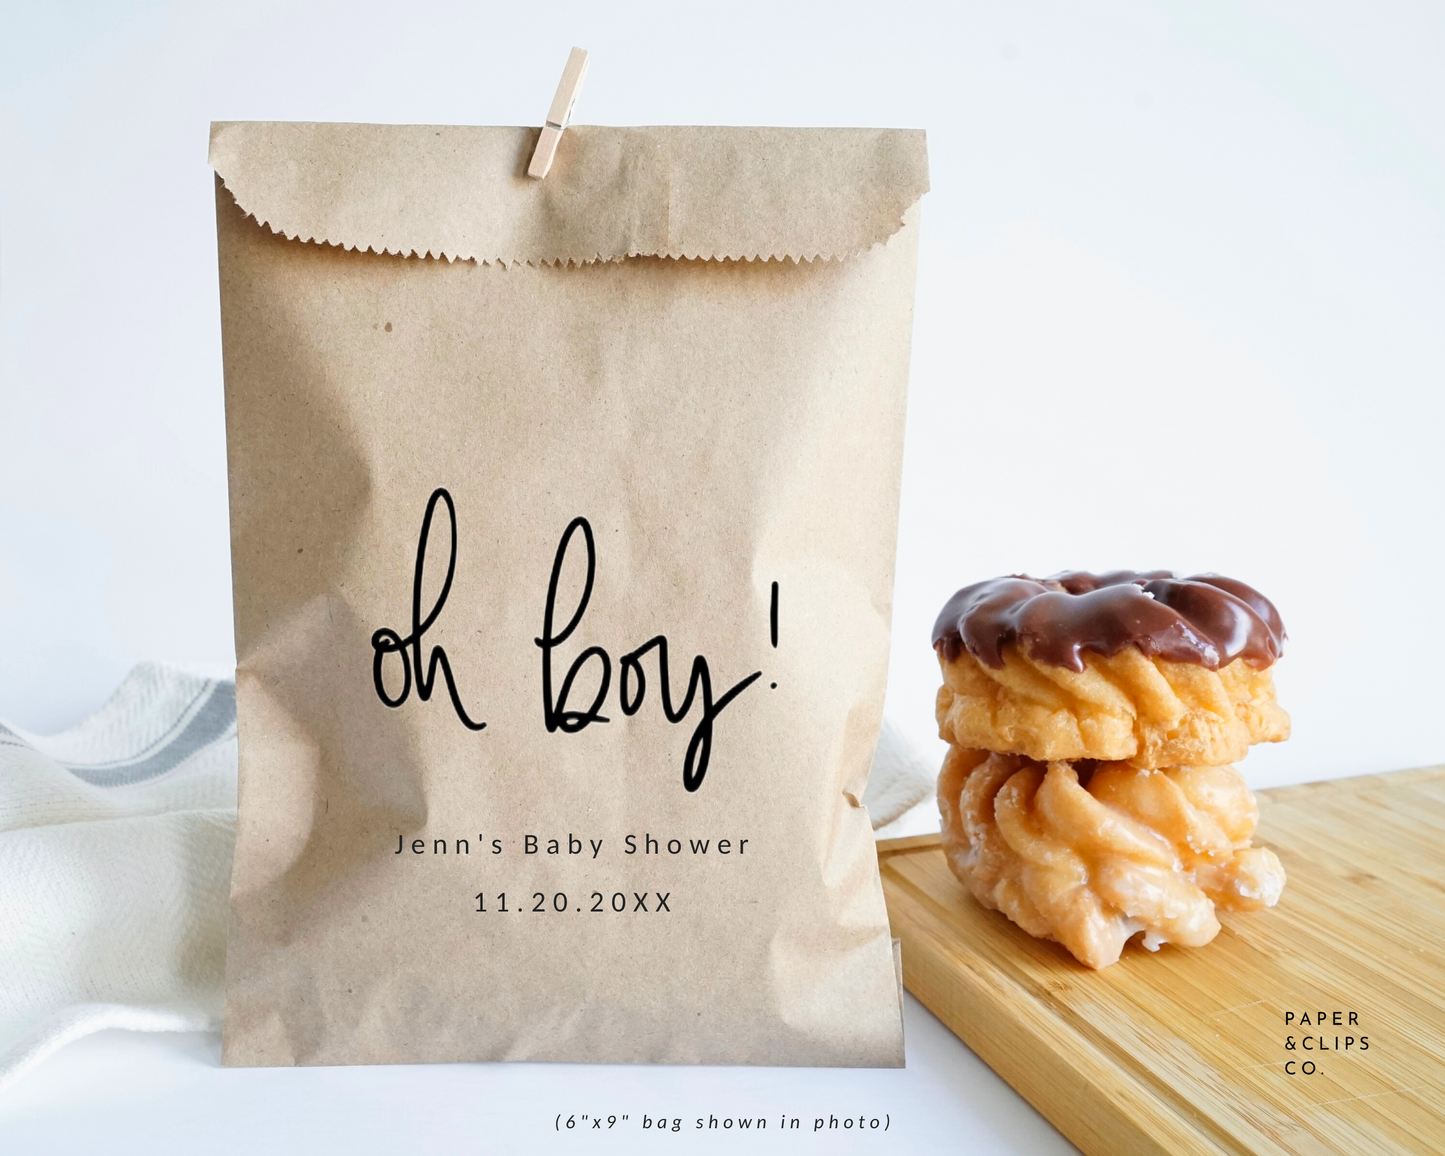 Oh Boy! - Brown Party Bags